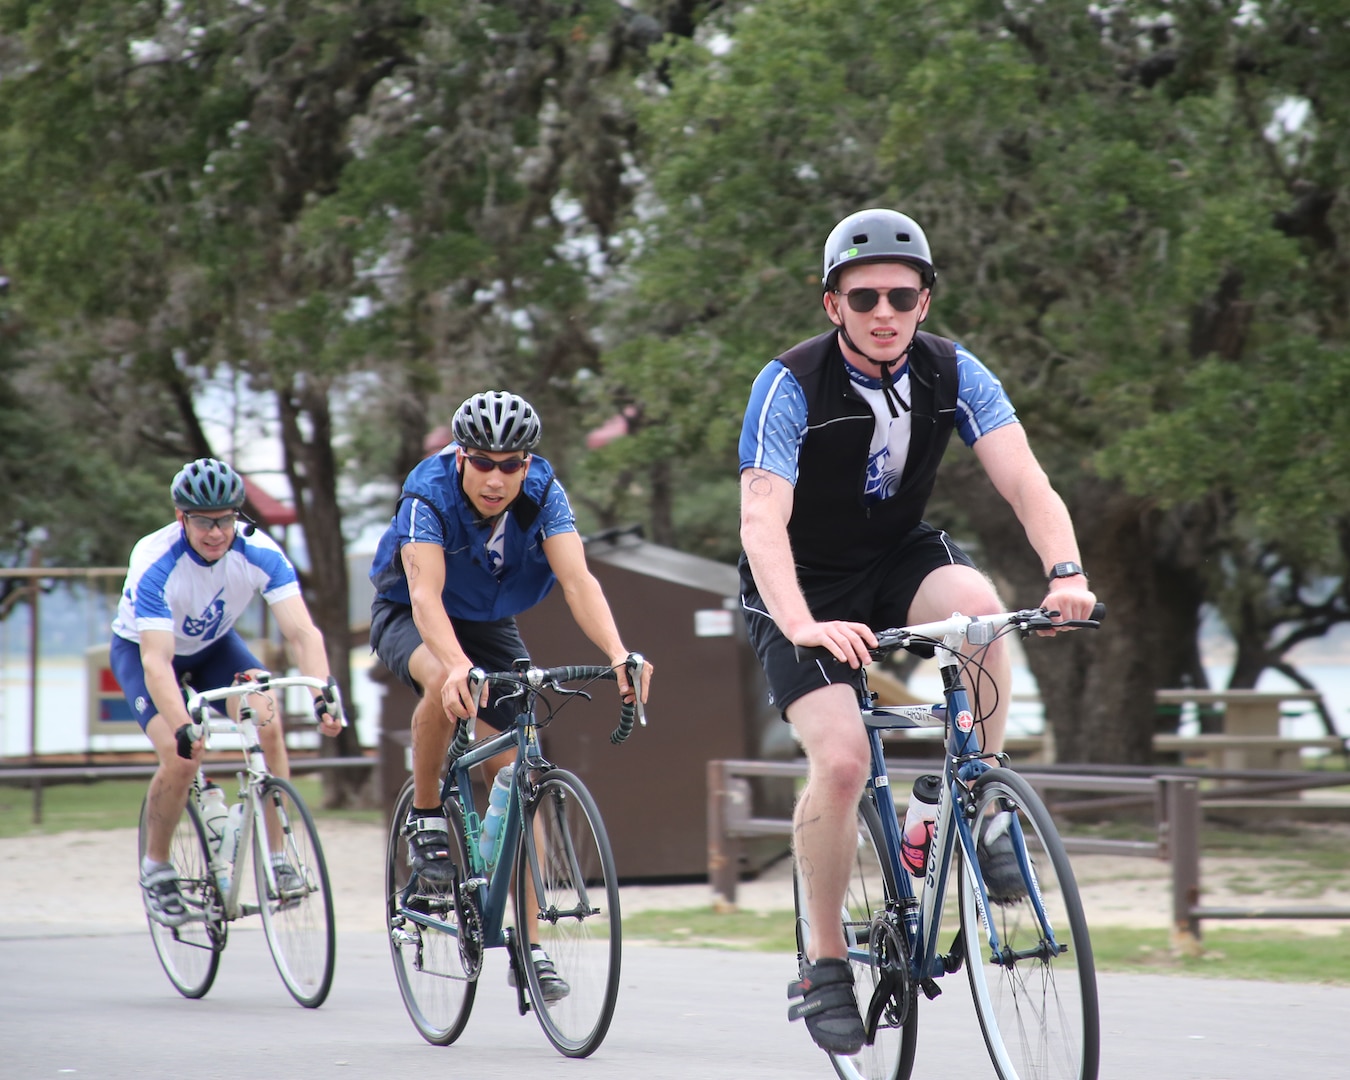 (From left to right)  Charles Shumaker, Brian Chung and Brian Peterson of the Phantom Knights Extreme Team, round a turn on the 22–mile bike course during the Rambler 120-team competition Oct. 20 held at Joint Base San Antonio Recreation Park, Canyon Lake, Texas.  The seventh annual Rambler 120 includes the bike course, a 6-mile run and a 2-mile rafting course. (U.S. Air Force photo by Dan J. Solis)